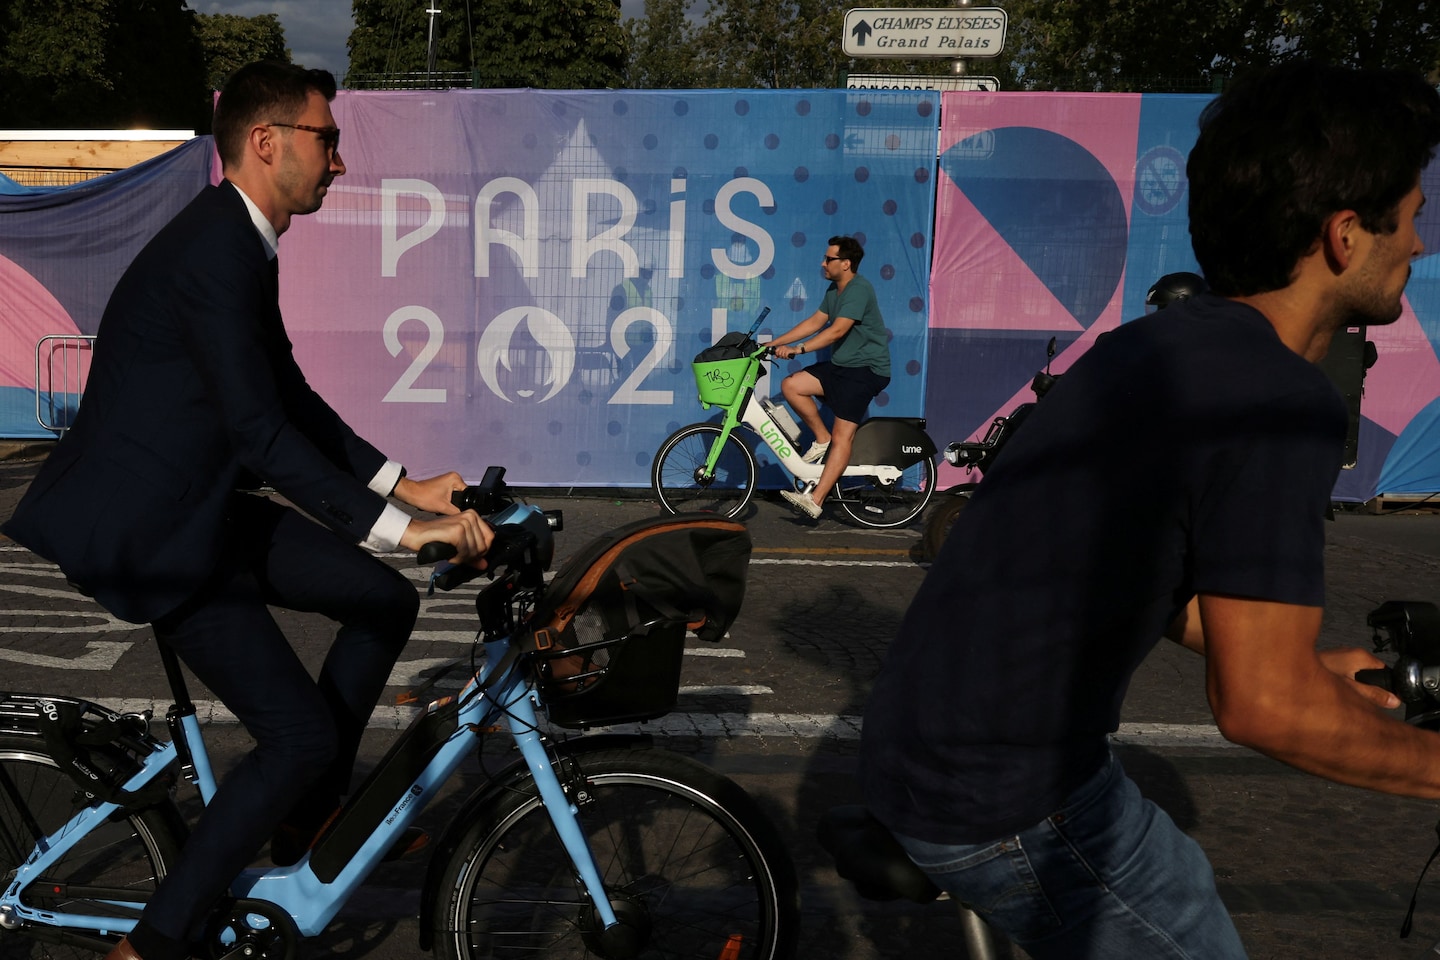 Olympic costs can crush host cities. Paris 2024 vowed cheaper Games.